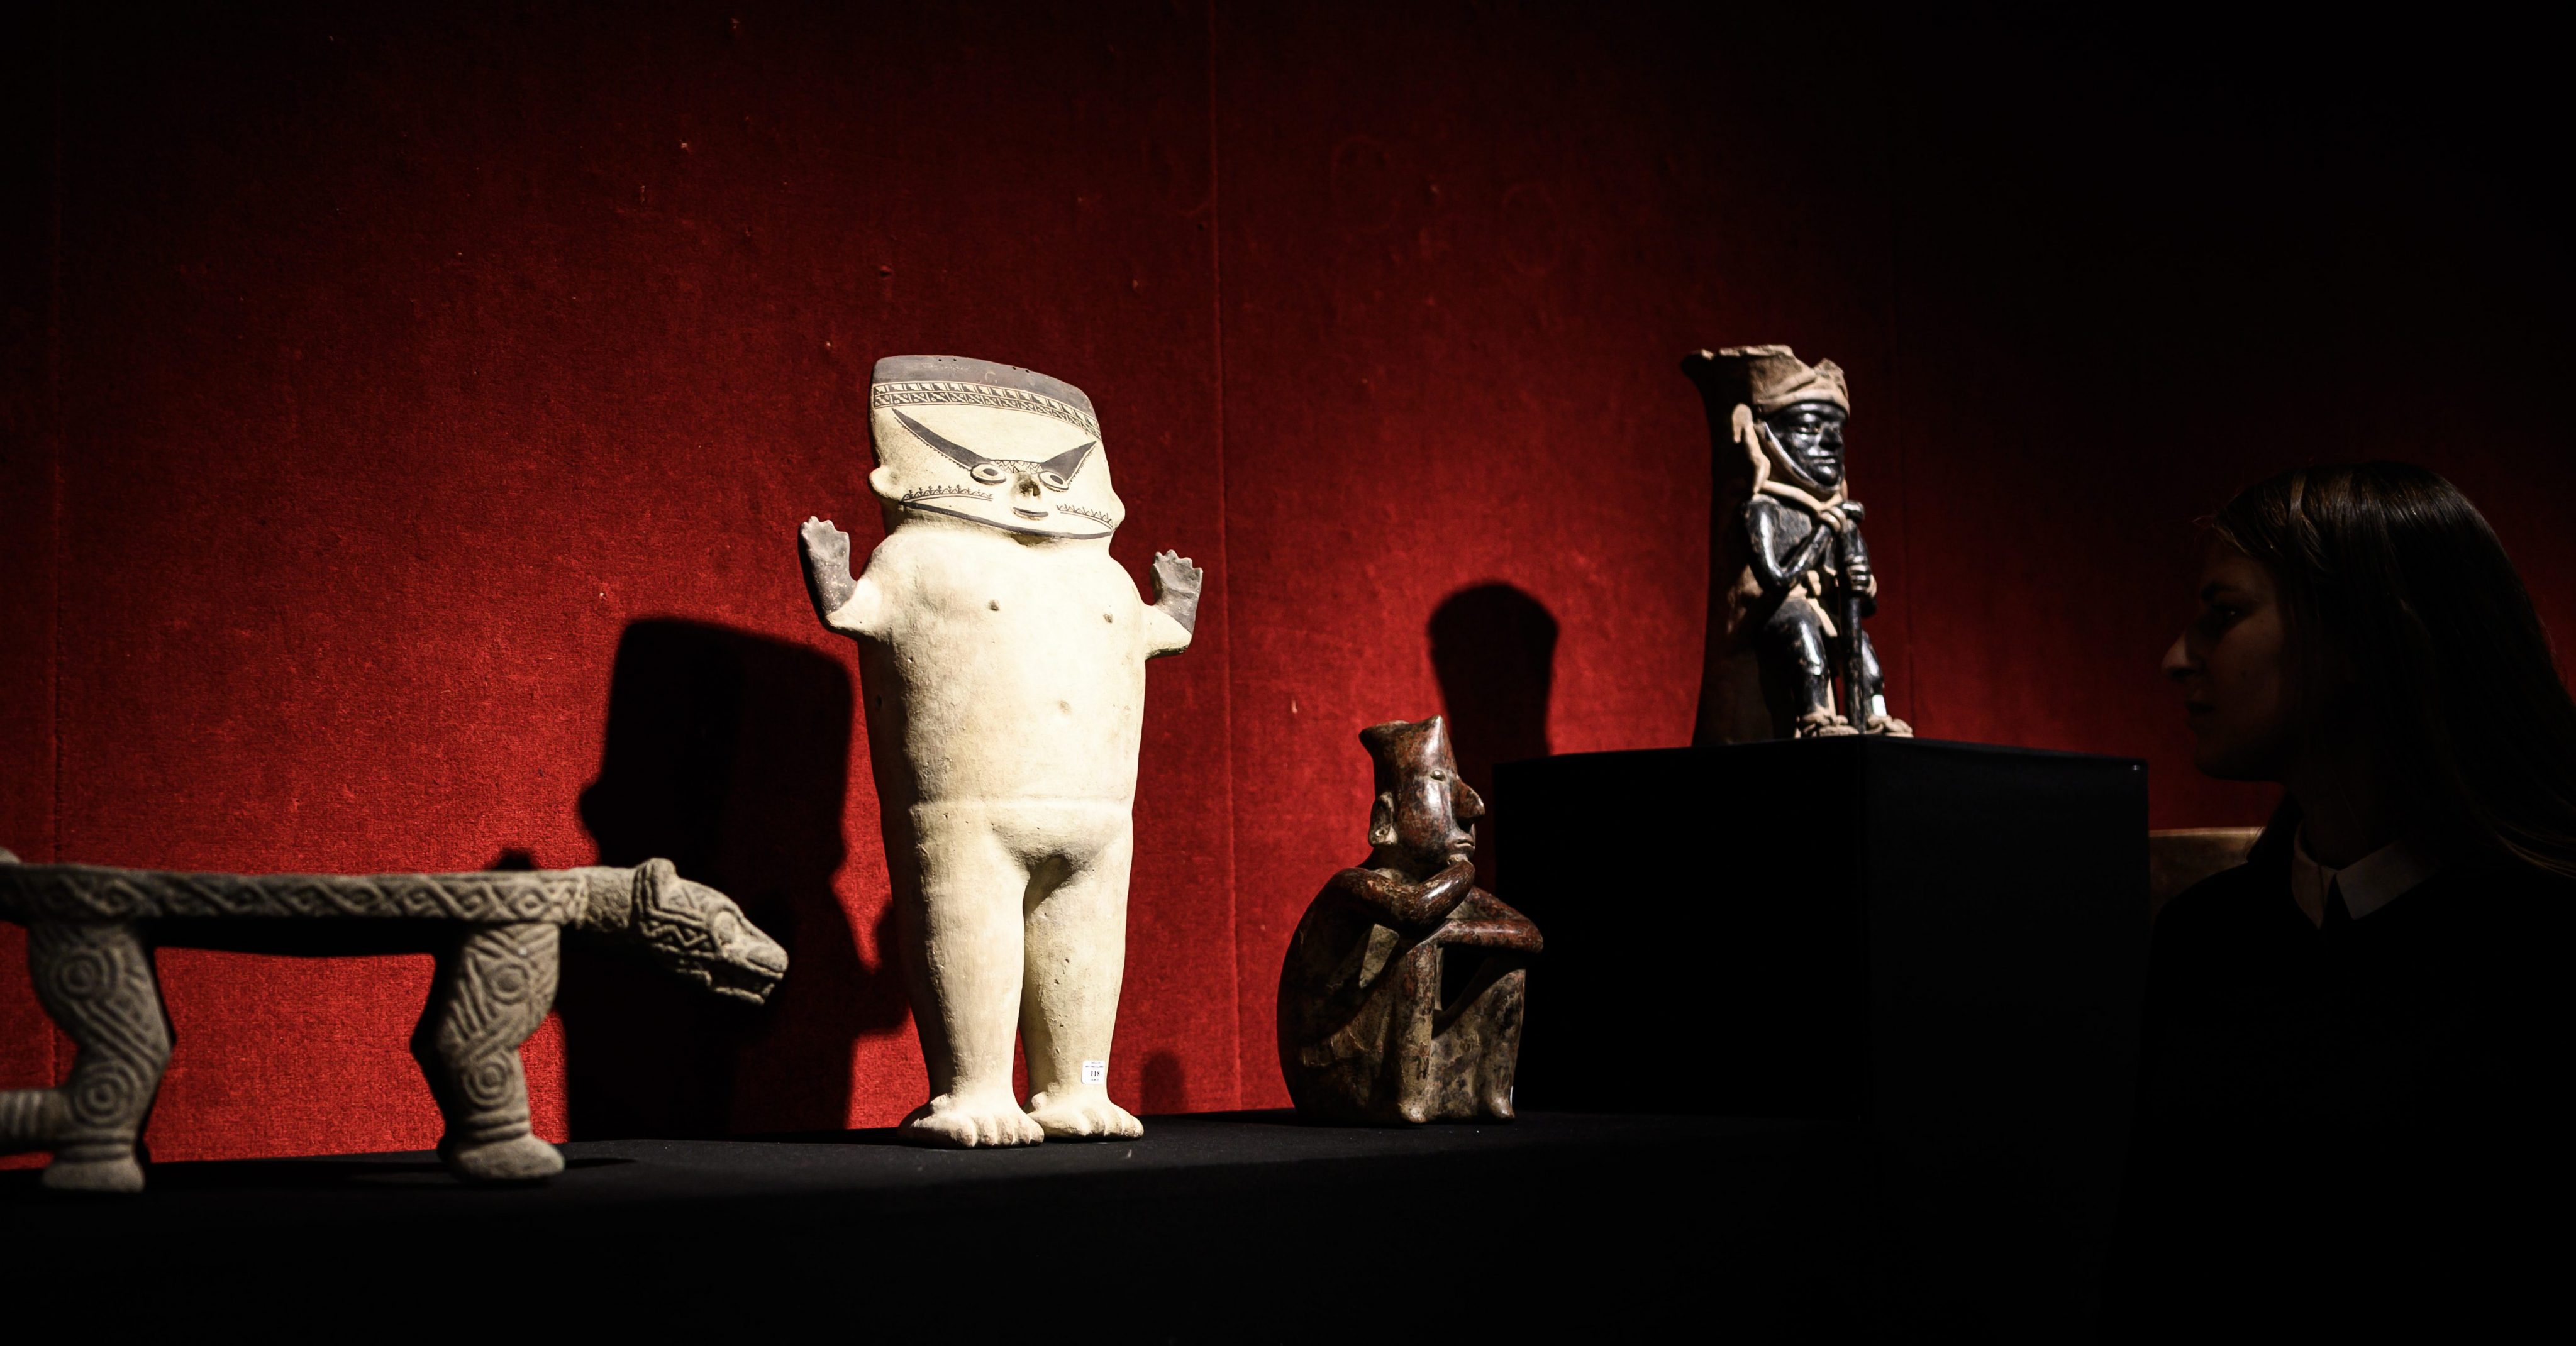 Despite Mexico claims, they auction Aztec goddesses and achieve 1.3 mdd